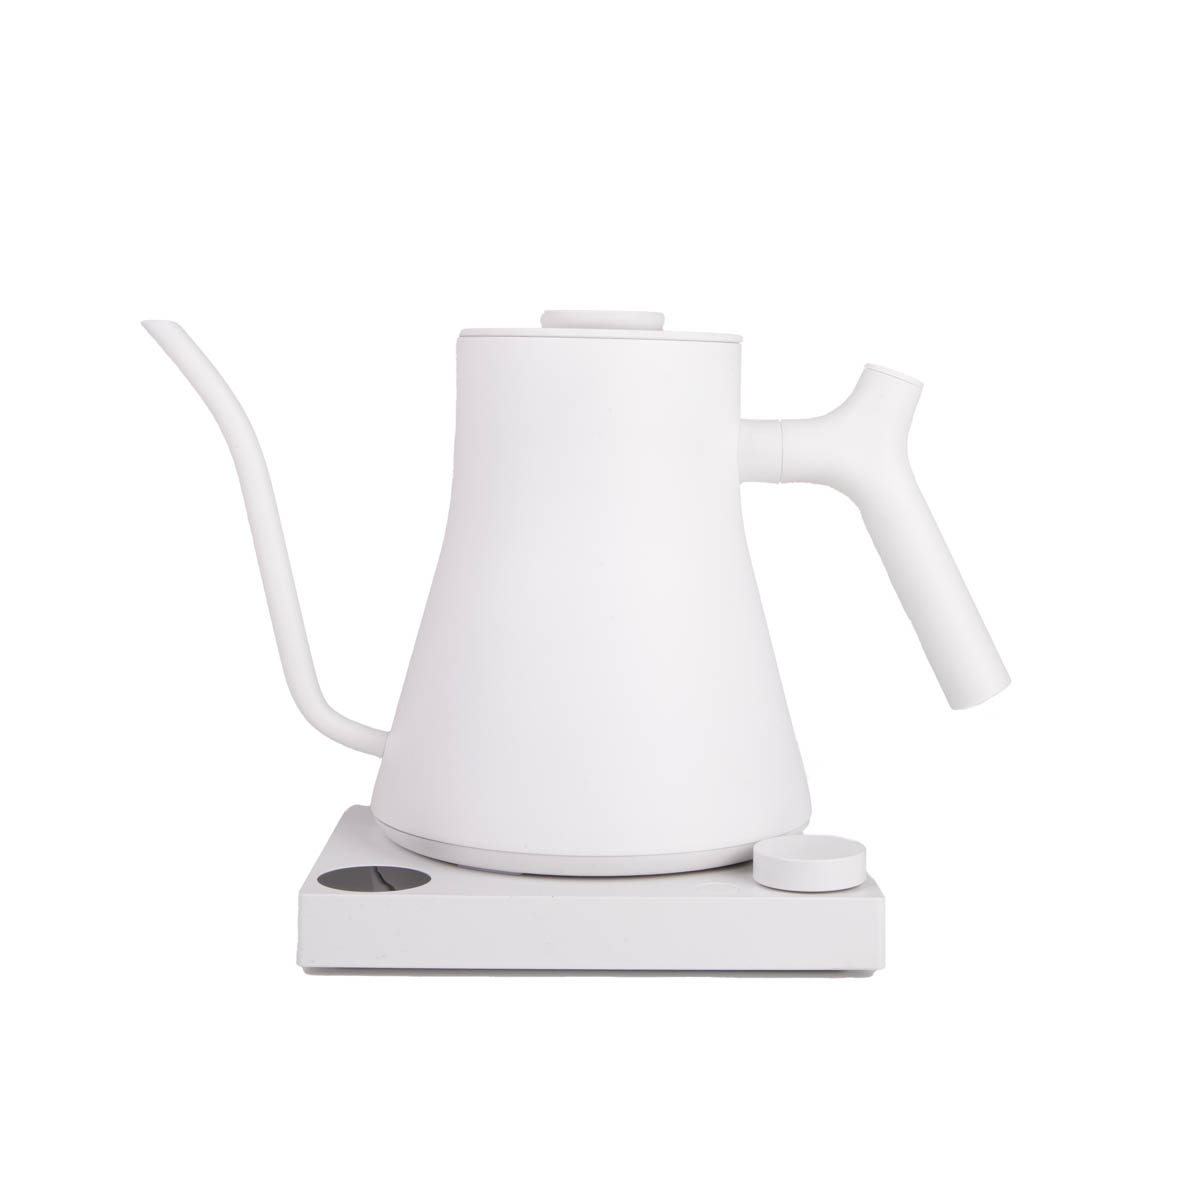 https://cdn11.bigcommerce.com/s-6h7ychjk4/images/stencil/original/products/11126/94453/Fellow-Stagg-EKG-Pro-Electric-Pouring-Kettle-WBG-3__53277.1666106559.jpg?c=1